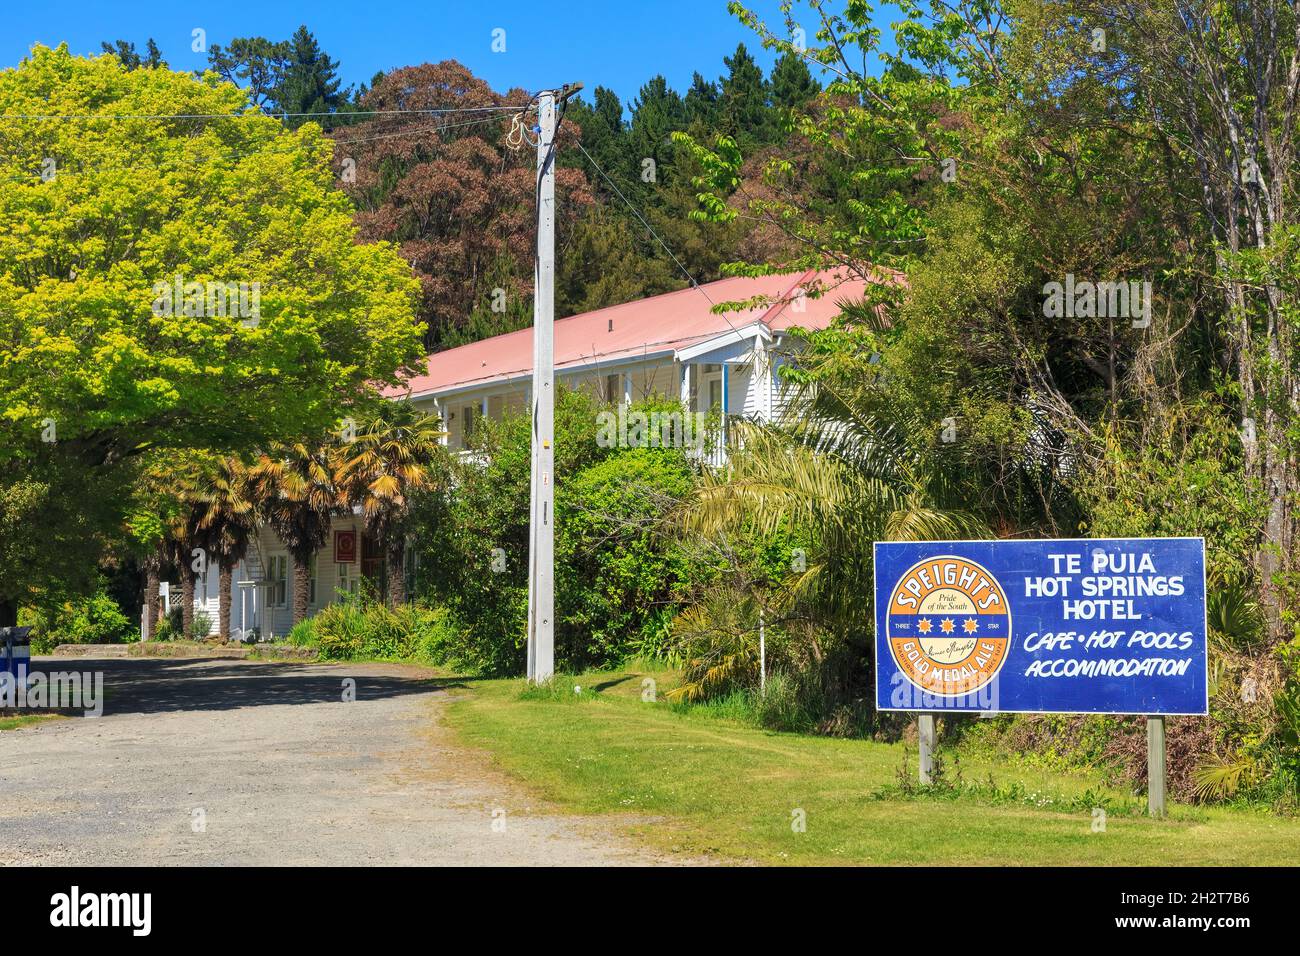 The historic Te Puia Hot Springs Hotel in the small town of Te Puia Springs, East Cape region, New Zealand. The hotel was built in 1918 Stock Photo